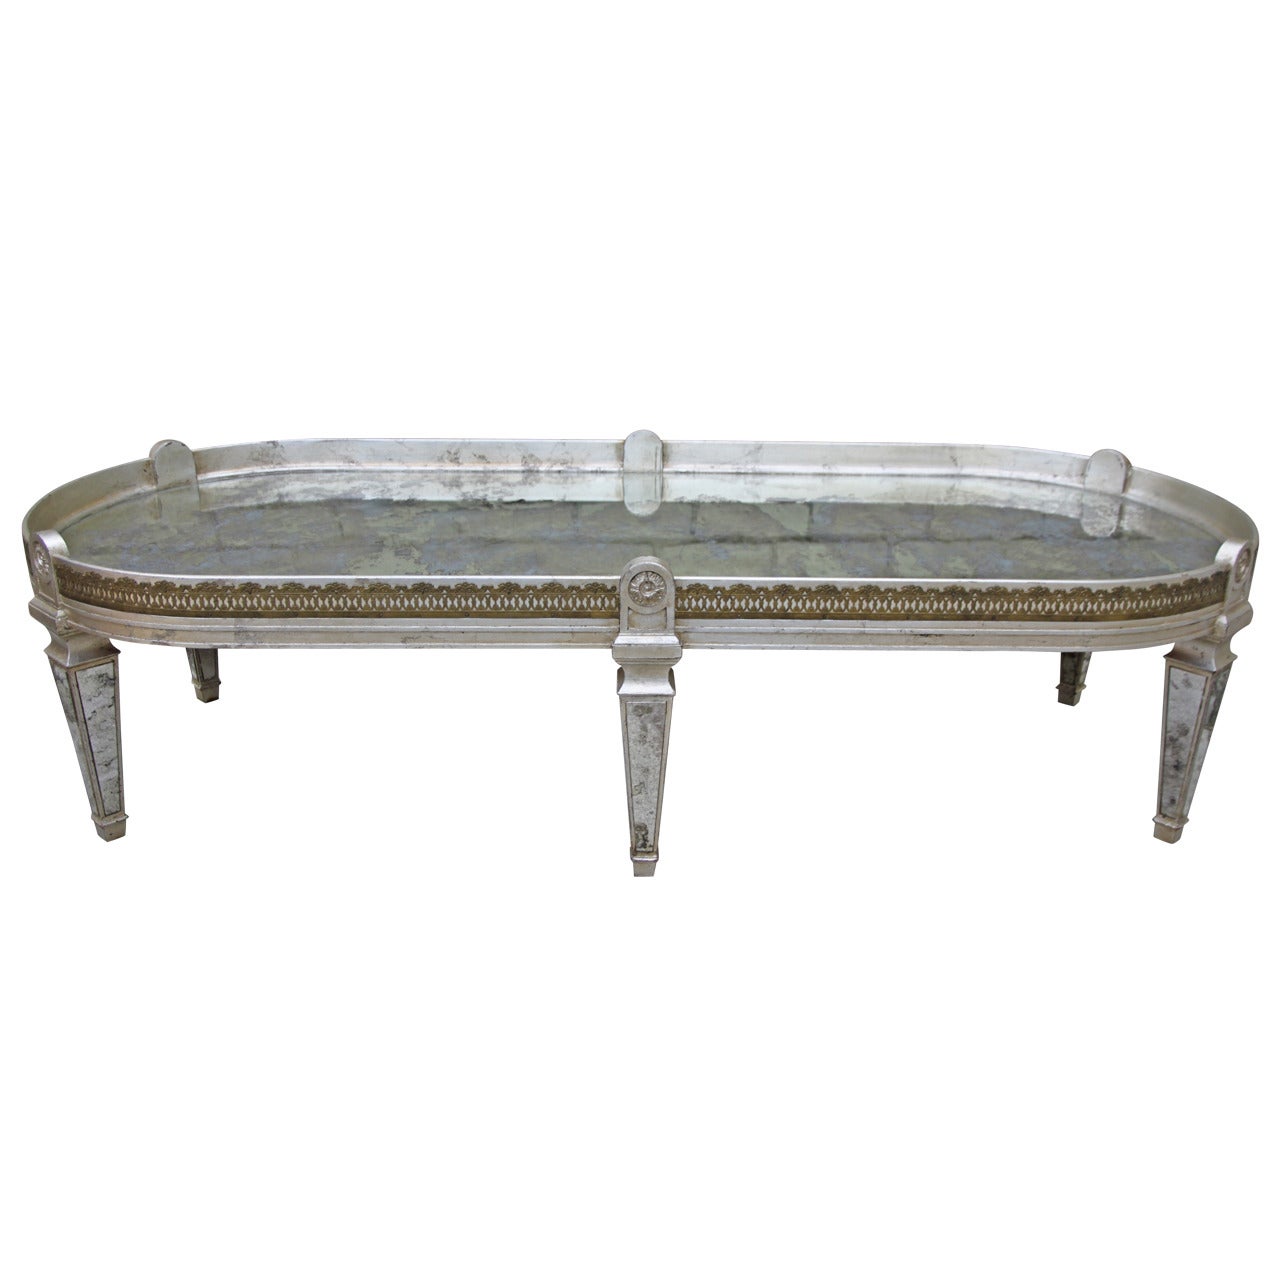 Mirrored and Silvered Racetrack Shaped Coffee Table